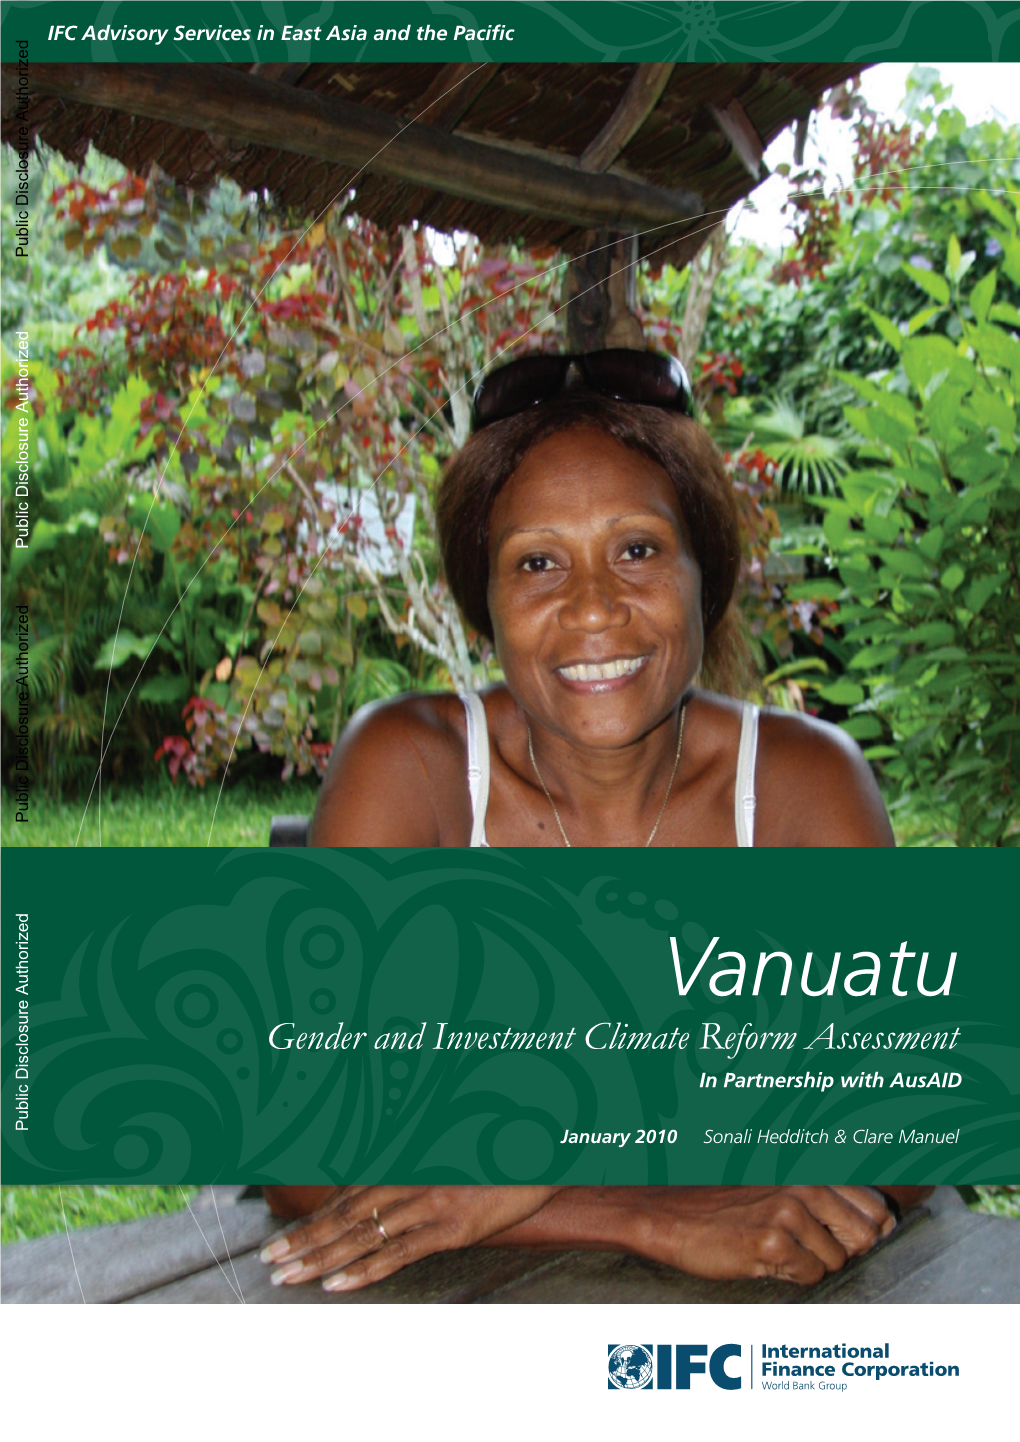 Vanuatu Gender and Investment Climate Reform Assessment in Partnership with Ausaid